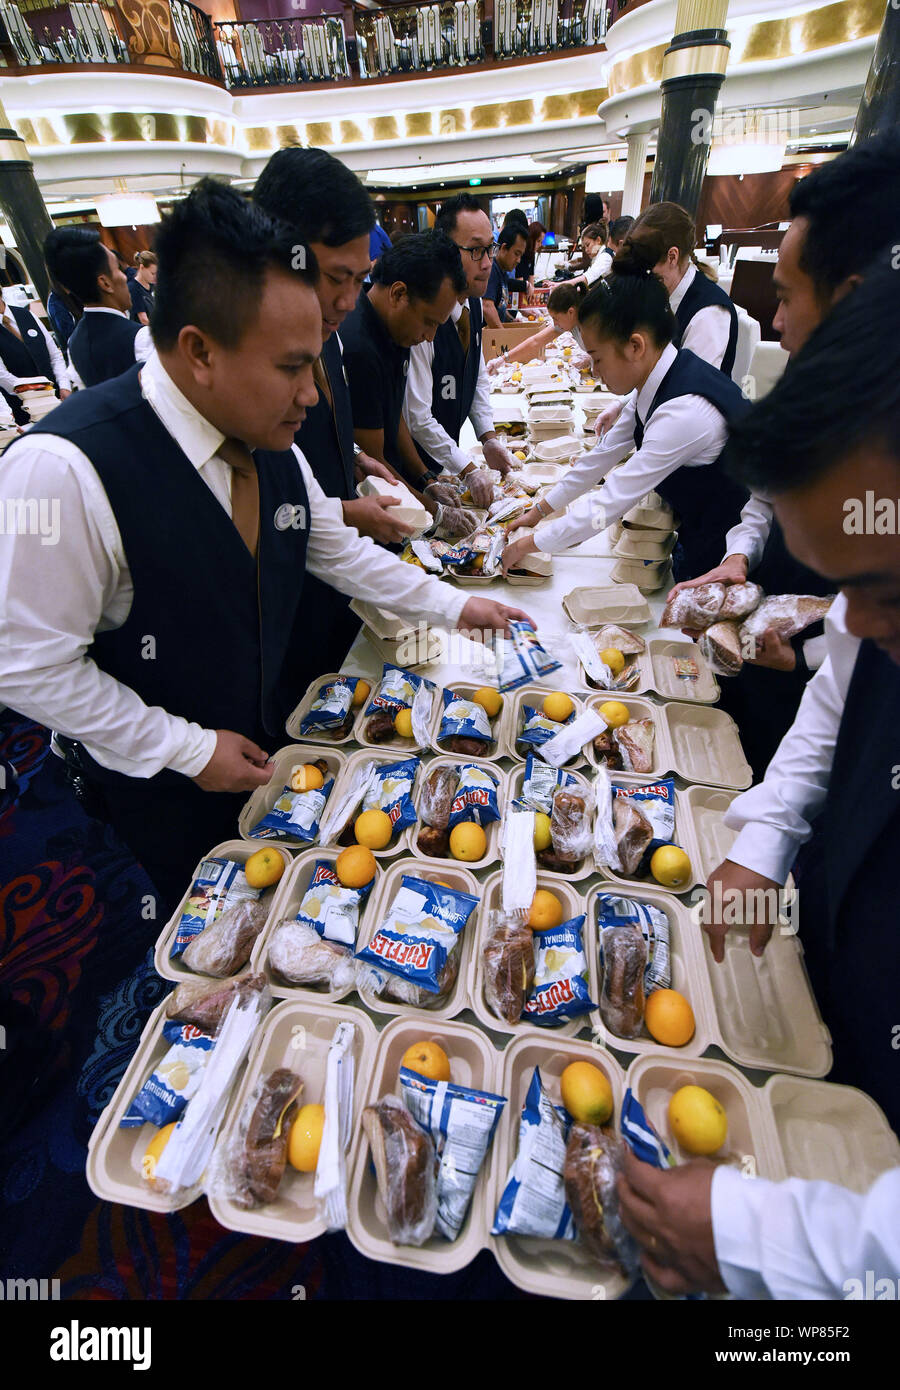 Freeport, The Bahamas. 06th Sep, 2019. September 6, 2019 - Freeport, Grand Bahama, Bahamas - Royal Caribbean International employees aboard the cruise ship Mariner of the Seas prepare 20,000 meals for the victims of Hurricane Dorian on September 6, 2019 as the ship cruises to Freeport, Grand Bahama where the meals will be distributed. Hurricane Dorian hit the island chain as a category 5 storm, battering them for two days before moving north. Credit: Paul Hennessy/Alamy Live News Stock Photo